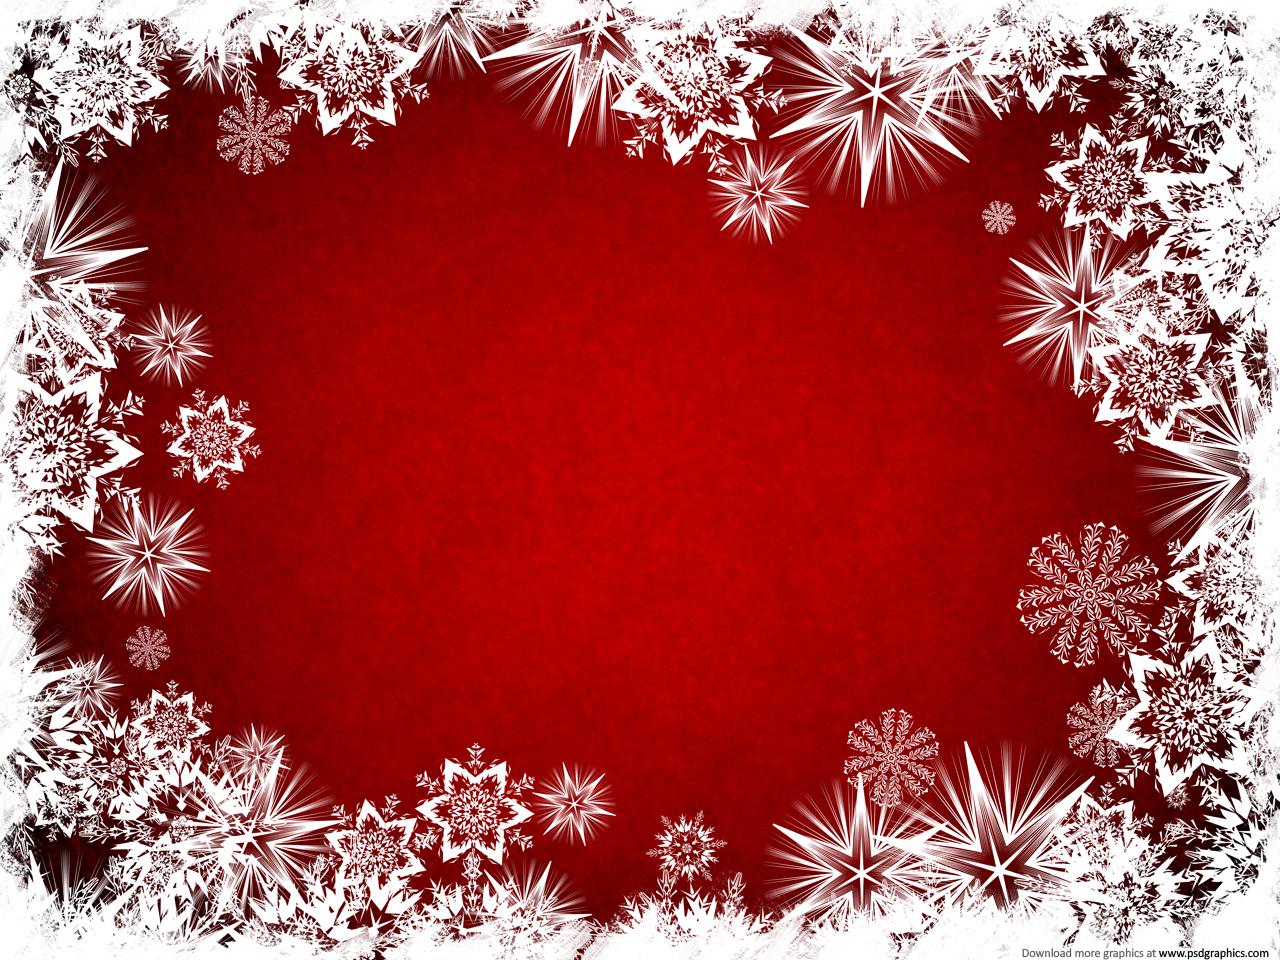 Medium size preview 1280x960px Abstract Christmas background 1280x960